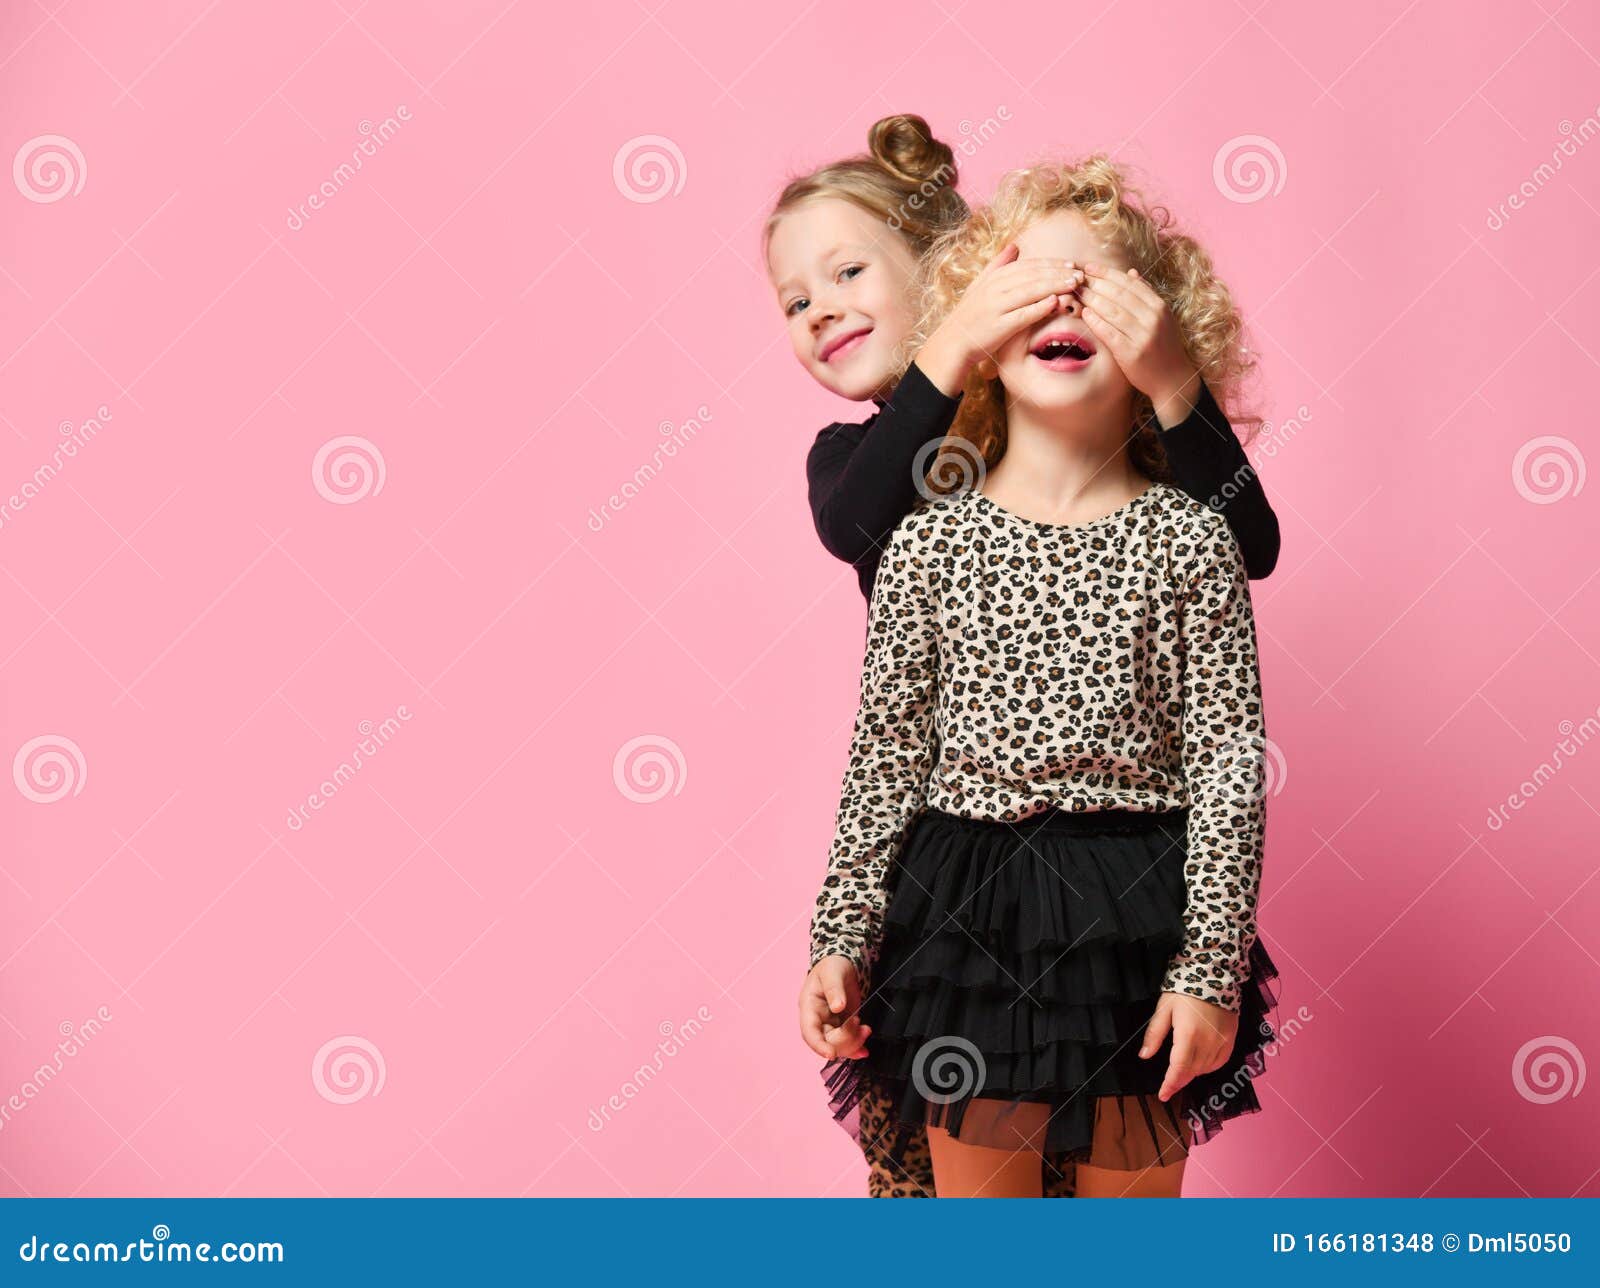 Two Kids Girls Friends Sisters in Leopard Print Clothes Pants and Shirt are  Playing Guess Who Game Stock Photo - Image of freedom, friendship: 166181348